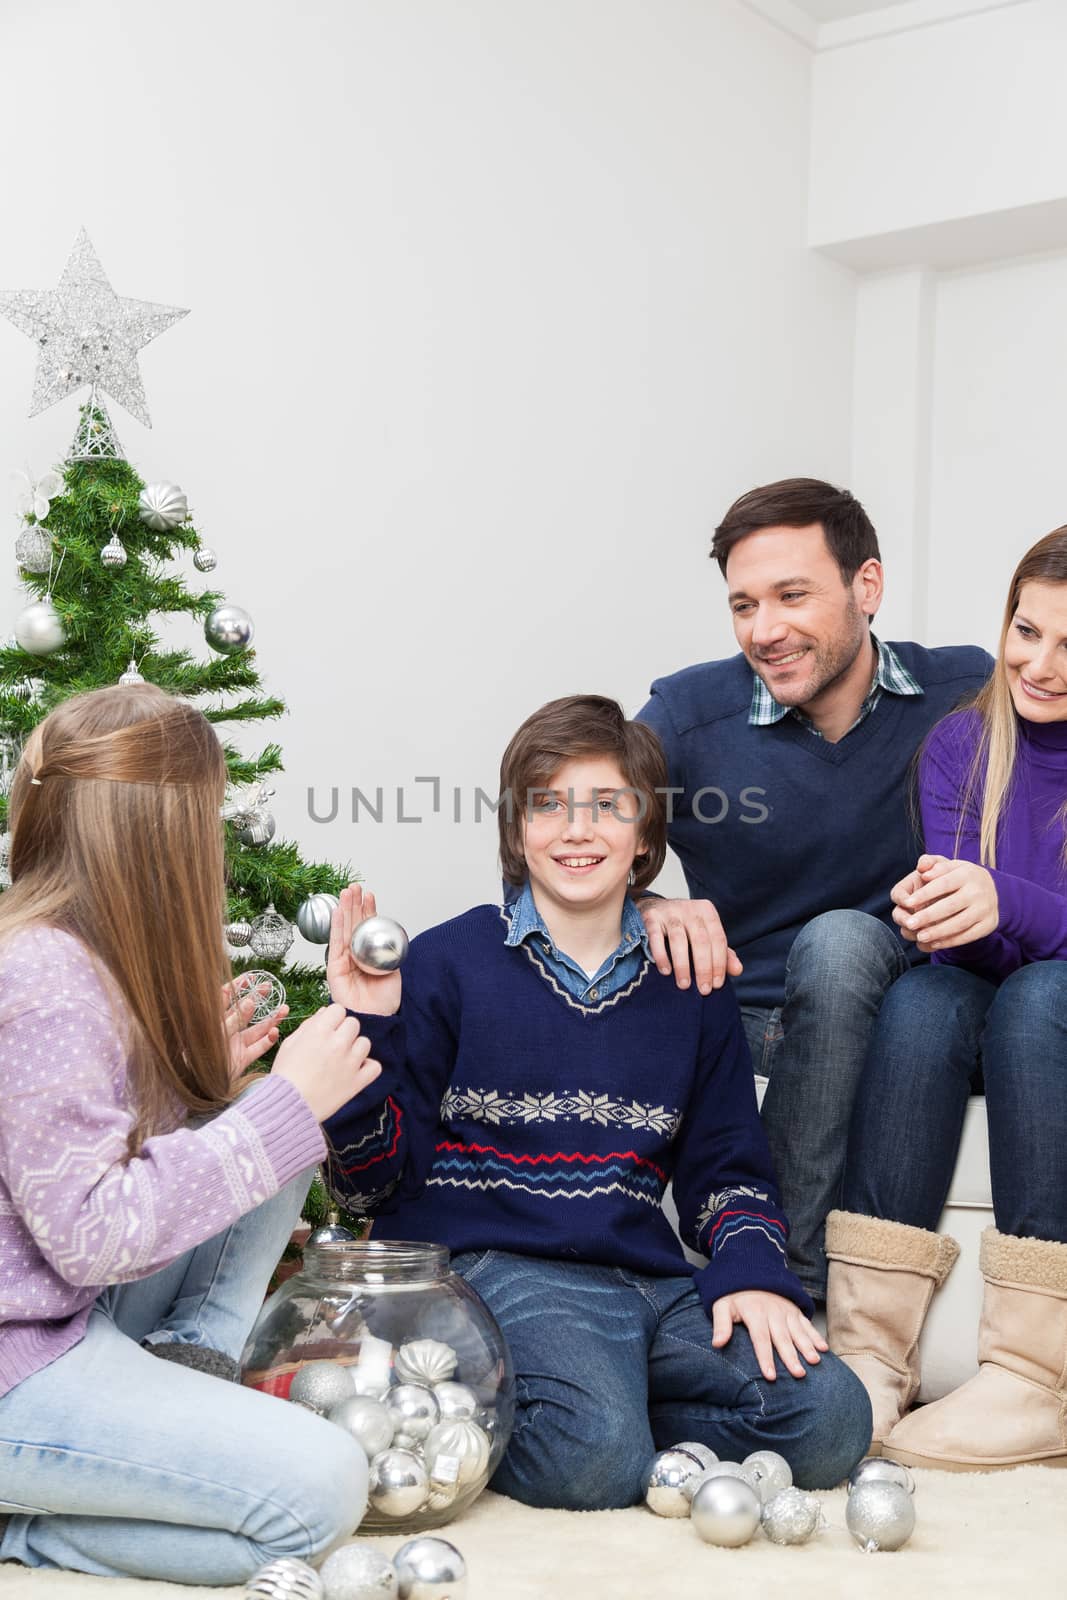 10-12, 8-10, apartment, balls, beautiful, blue, bowl, boy, brother, brothers, carpet, caucasian, celebration, child, children, christmas, cute, december, decor, decorated, decoration, festive, festivity, girl, girls, green, hanging, happiness, happy, holding, holiday, holidays, home, look, looking, camera, horizontal, house, joy, leisure, lifestyle, little, merry, model, old, open, person, property, releases, room, santa, silver, sitting, tree, years, couch, parents, 30-35, sofa, star